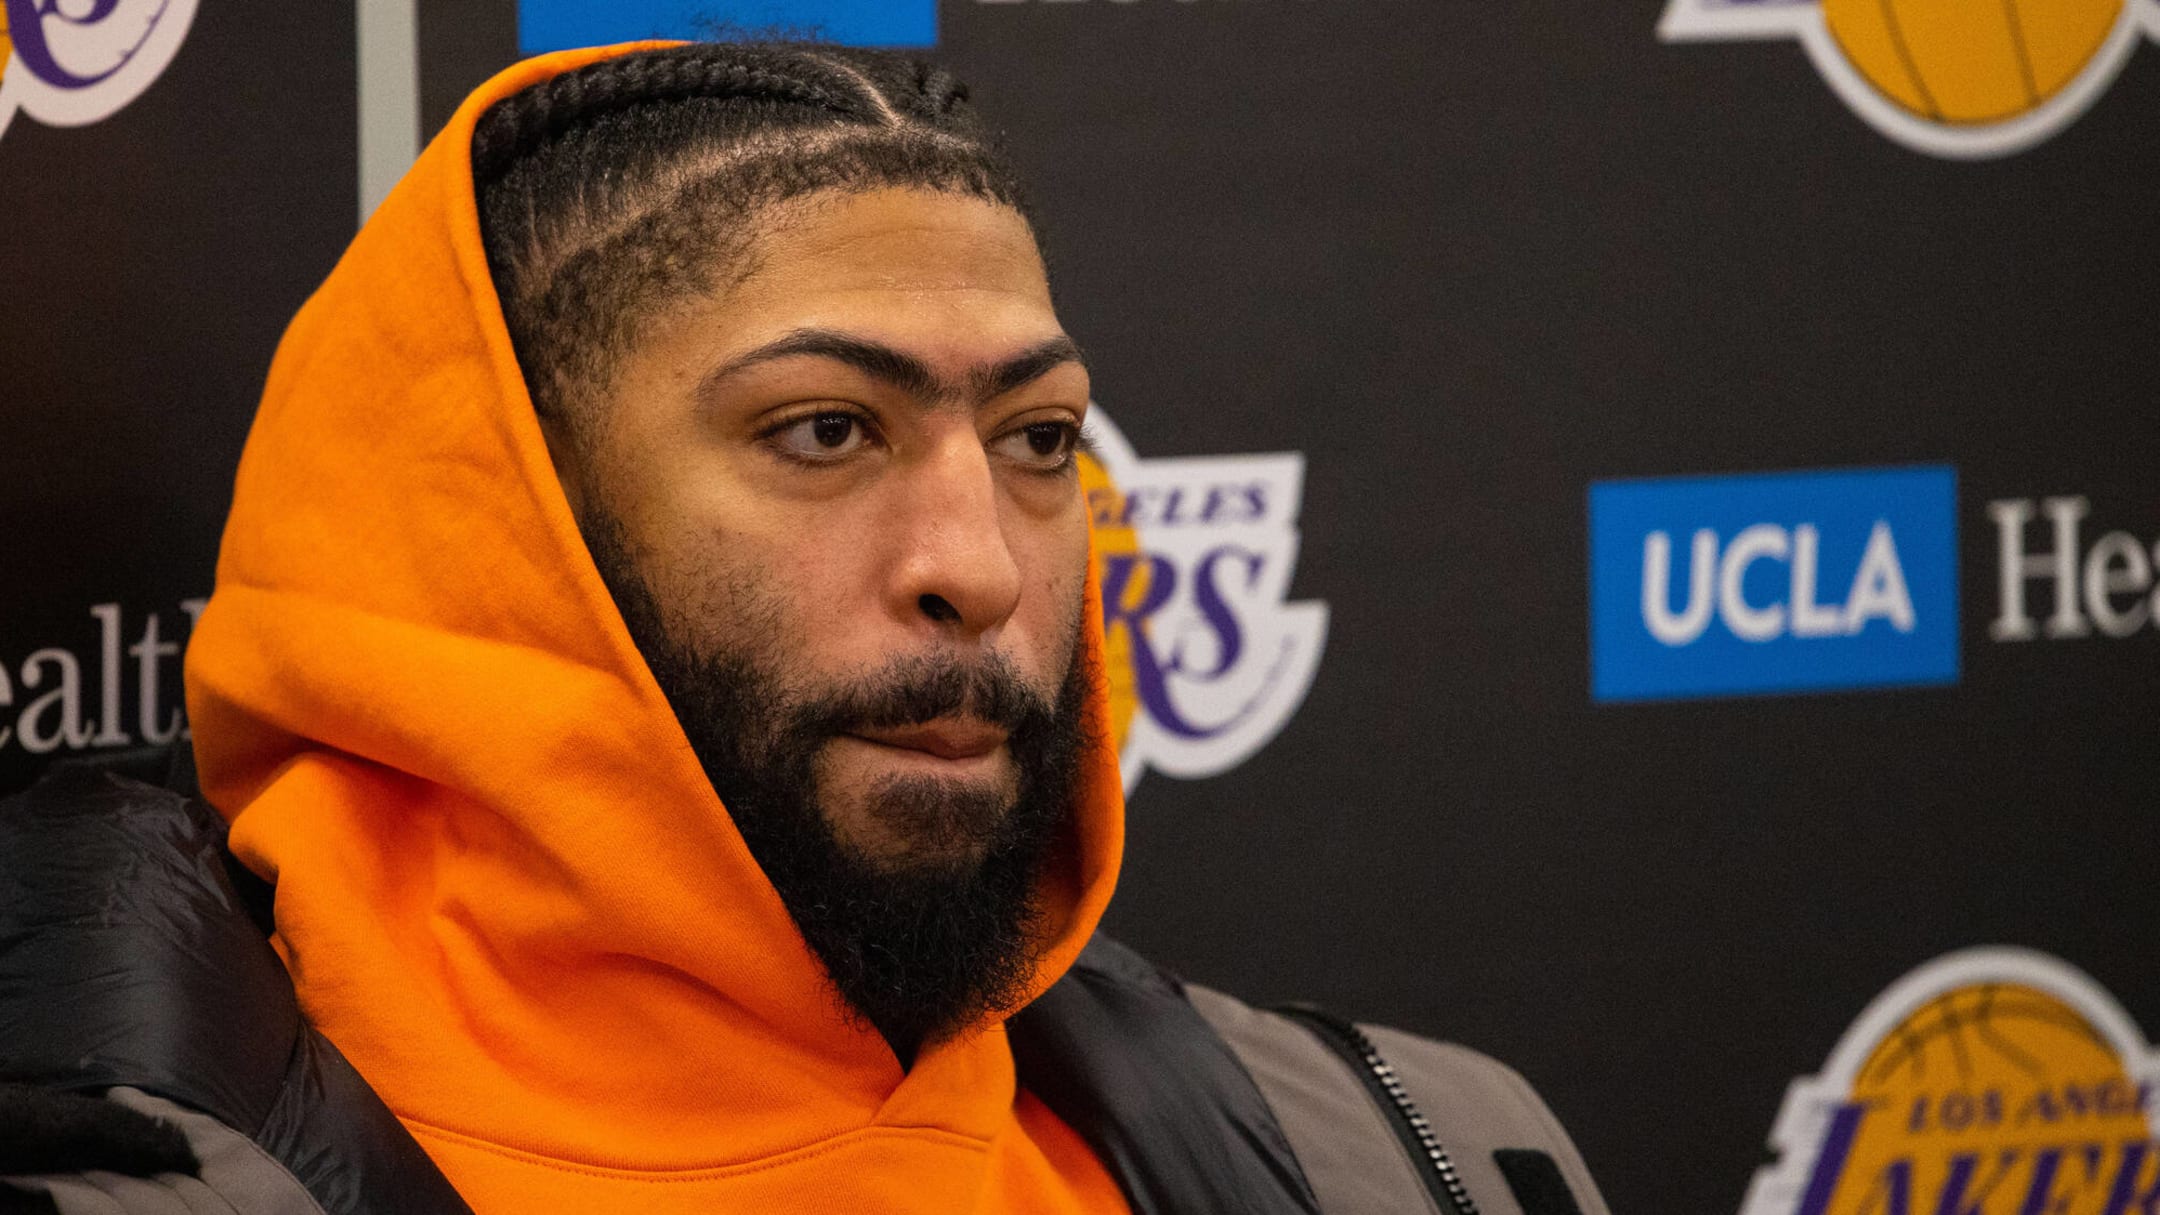 Lakers finally win without LeBron James, Anthony Davis